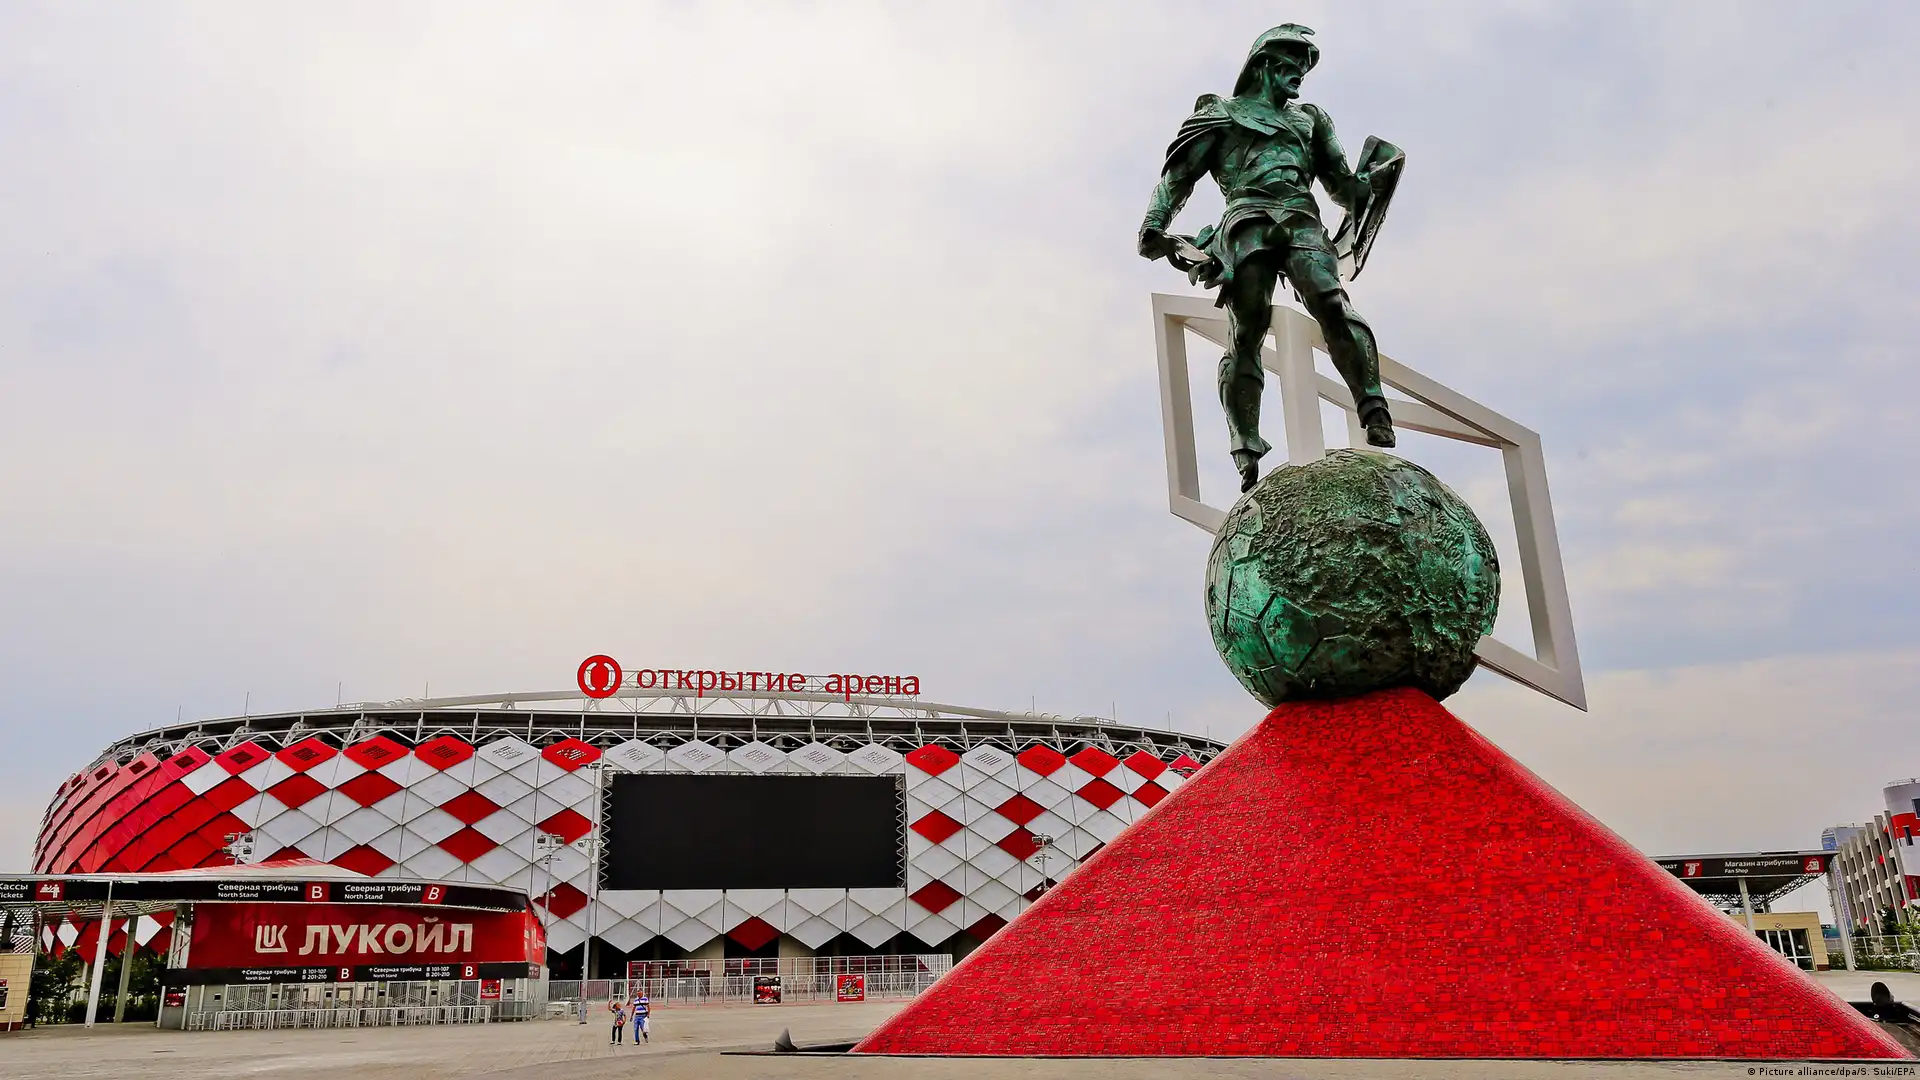 Spartak Moscow embroiled in fresh racism storm after Twitter post